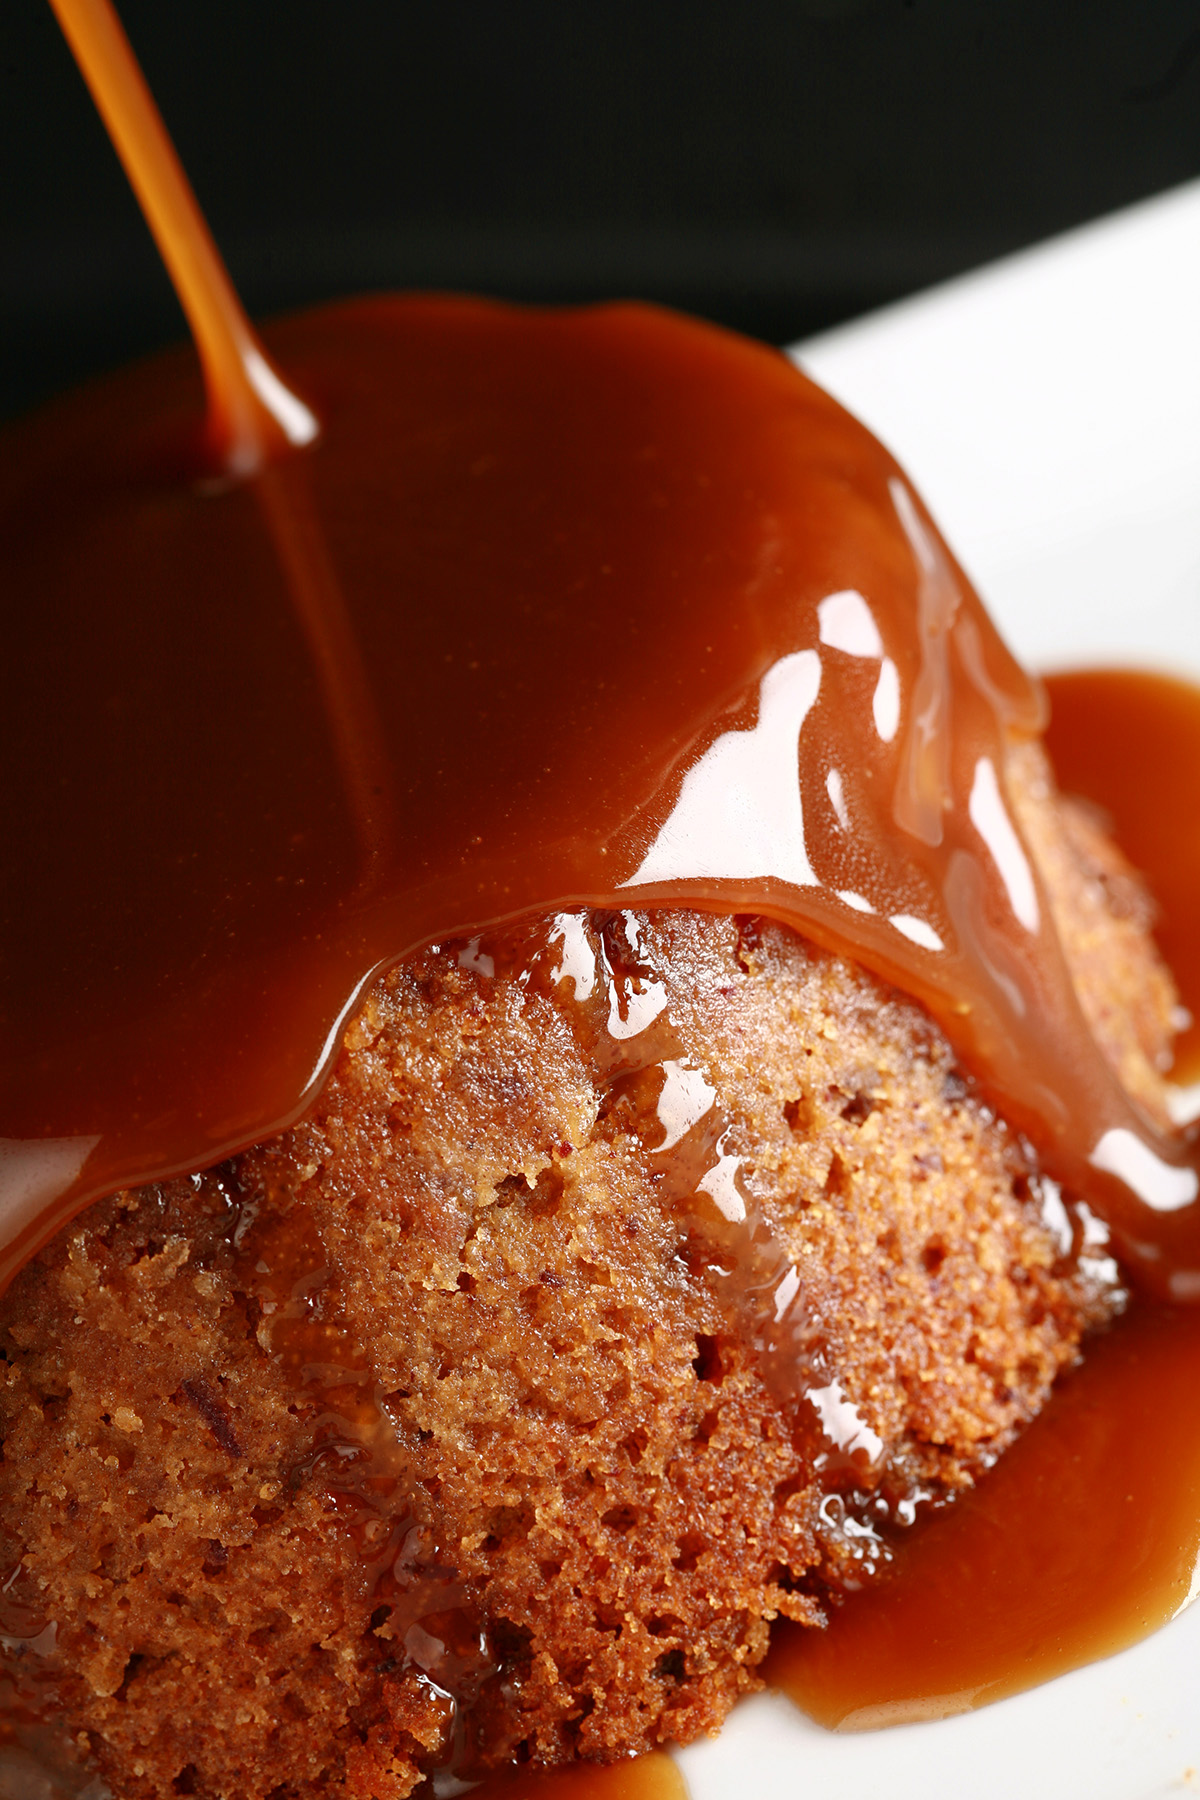 A gluten-free sticky date pudding with toffee sauce being poured over it.